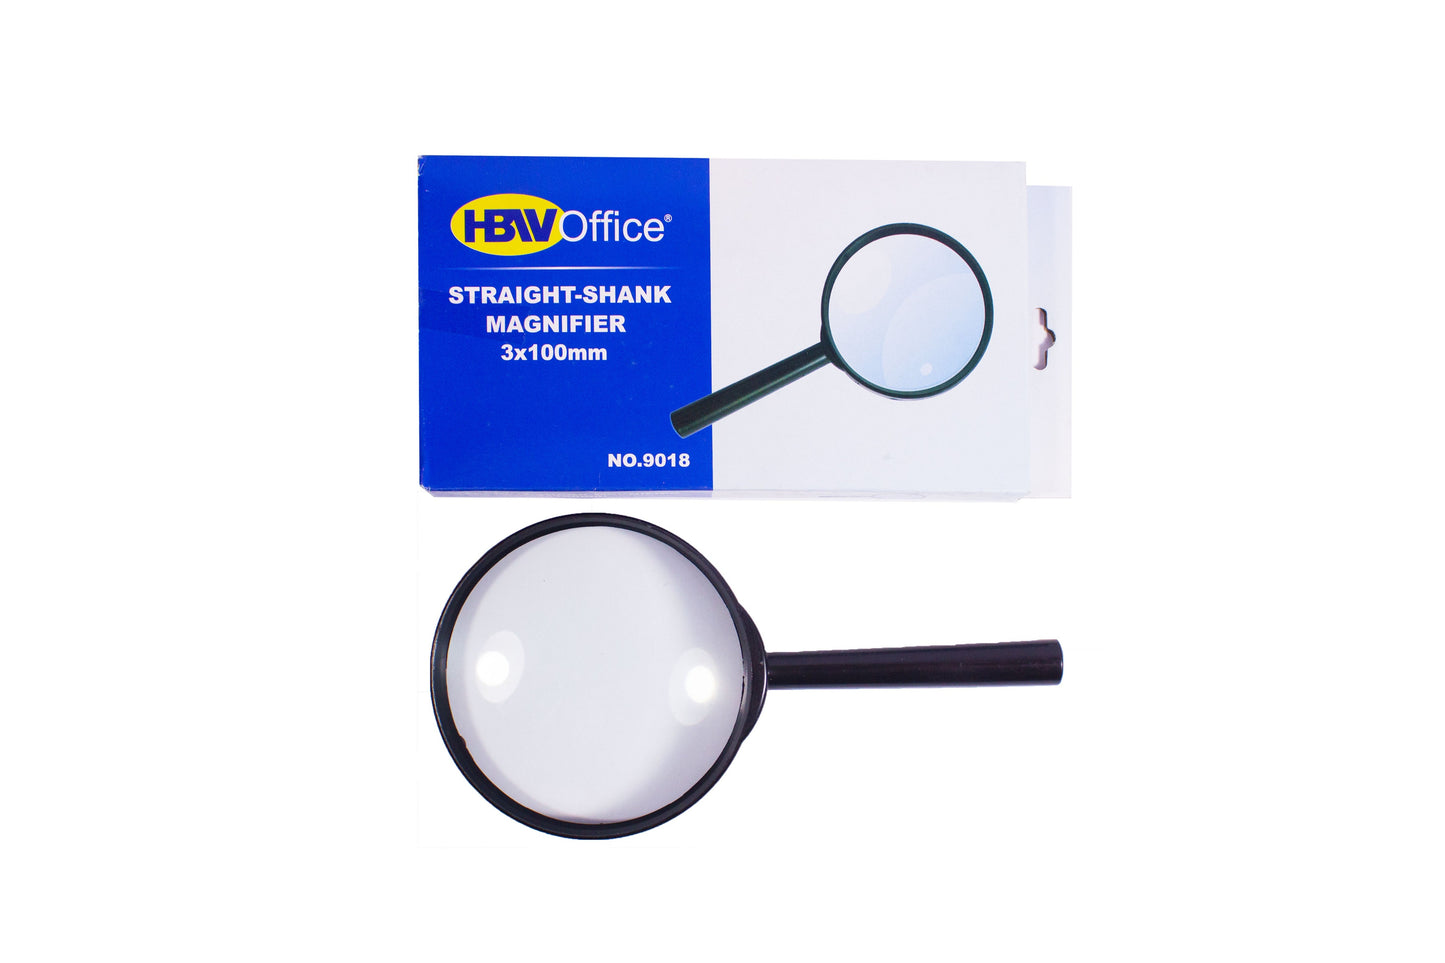 HBW Office Straight Shank Magnifier